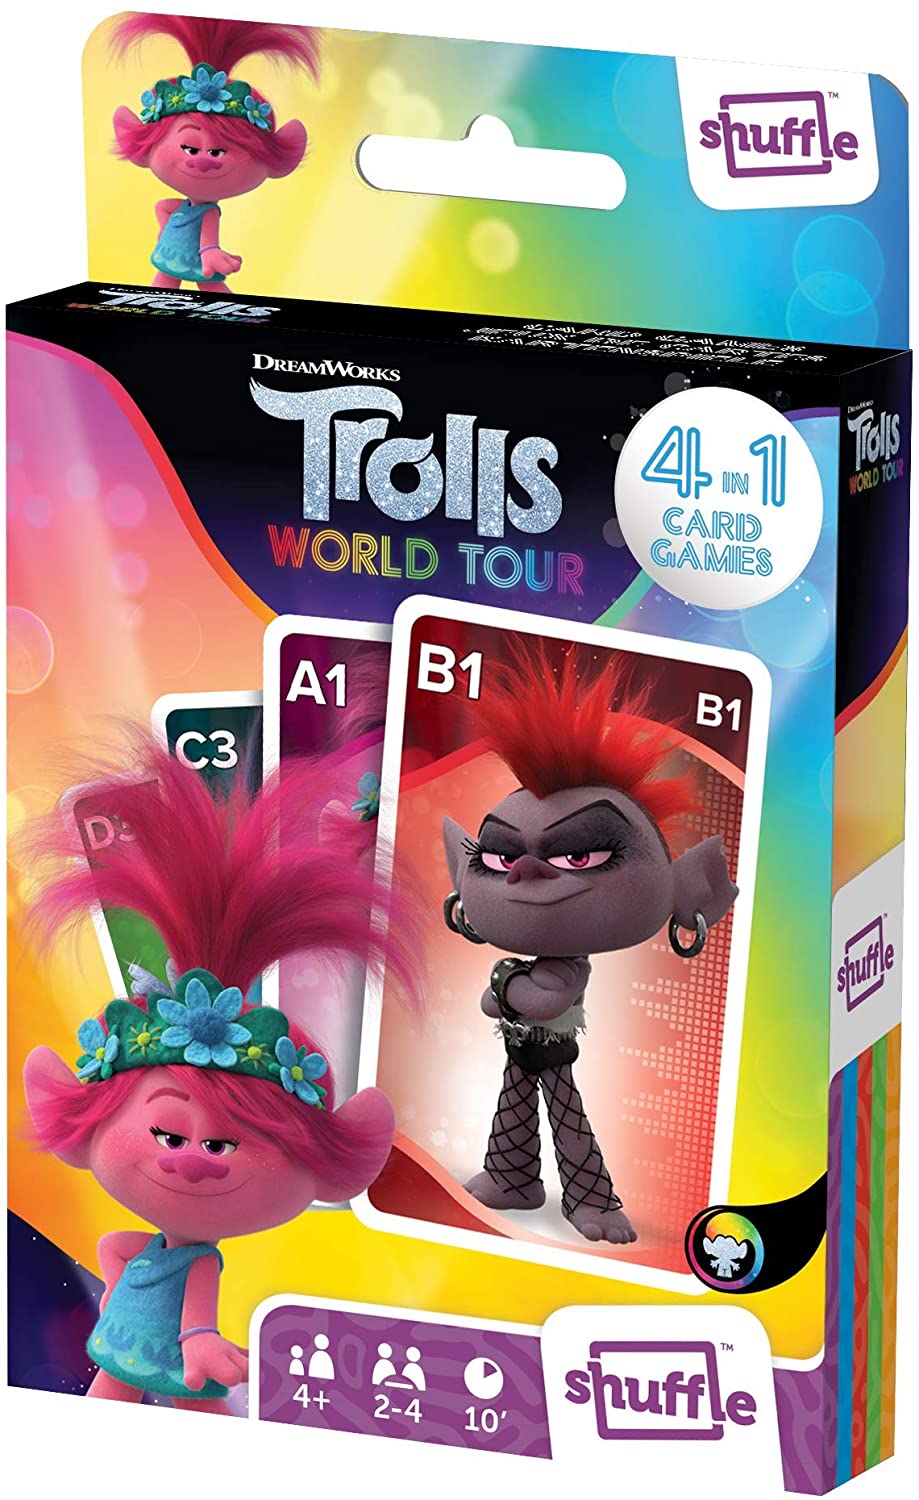 Shuffle Trolls Card Games For Kids - 4 in 1 Snap, Pairs, Happy Families & Action